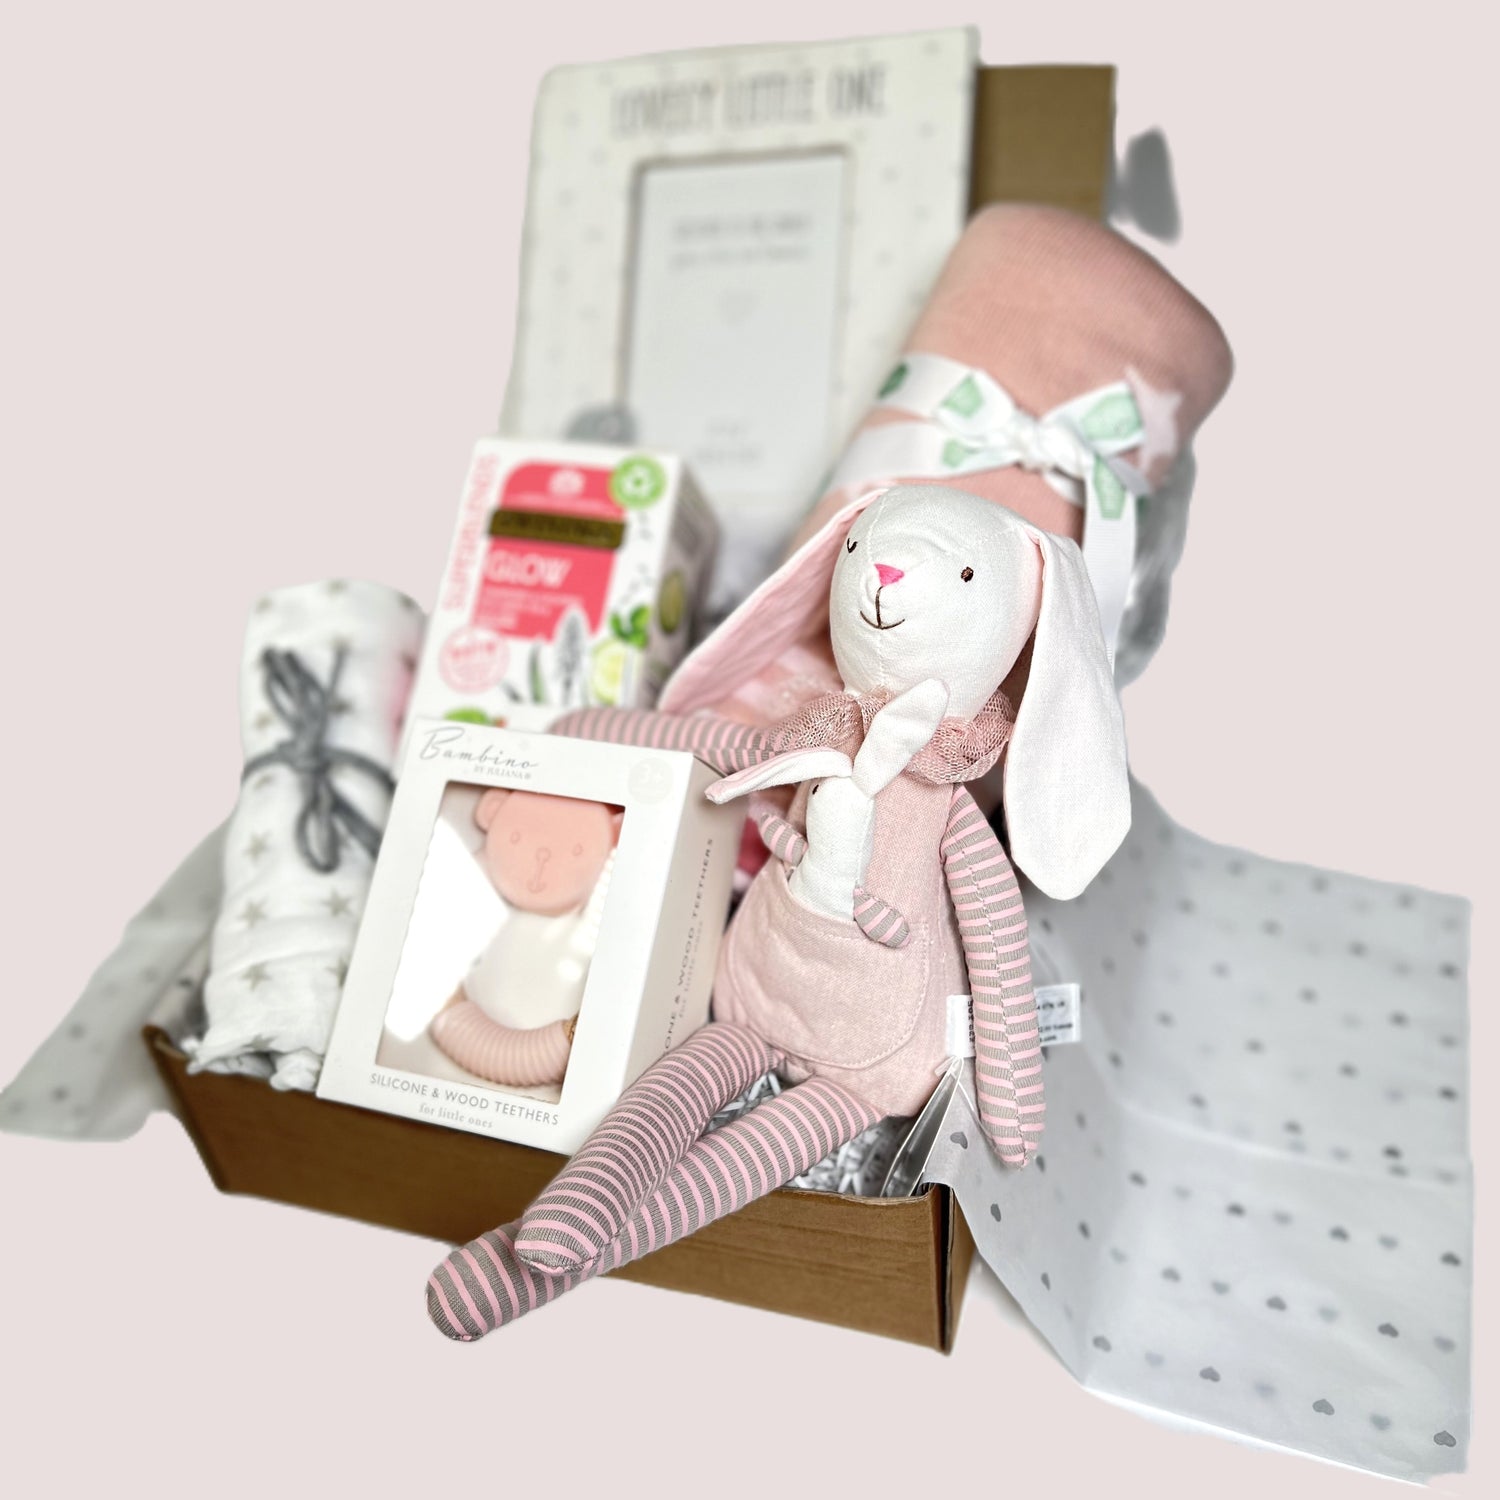 New parents gift hamper for a baby girl includes a pink star print cotton baby blanket, a bambino bear teether, a white and grey muslin square, a wooden photo frame and a packet of "Glow" teabags.